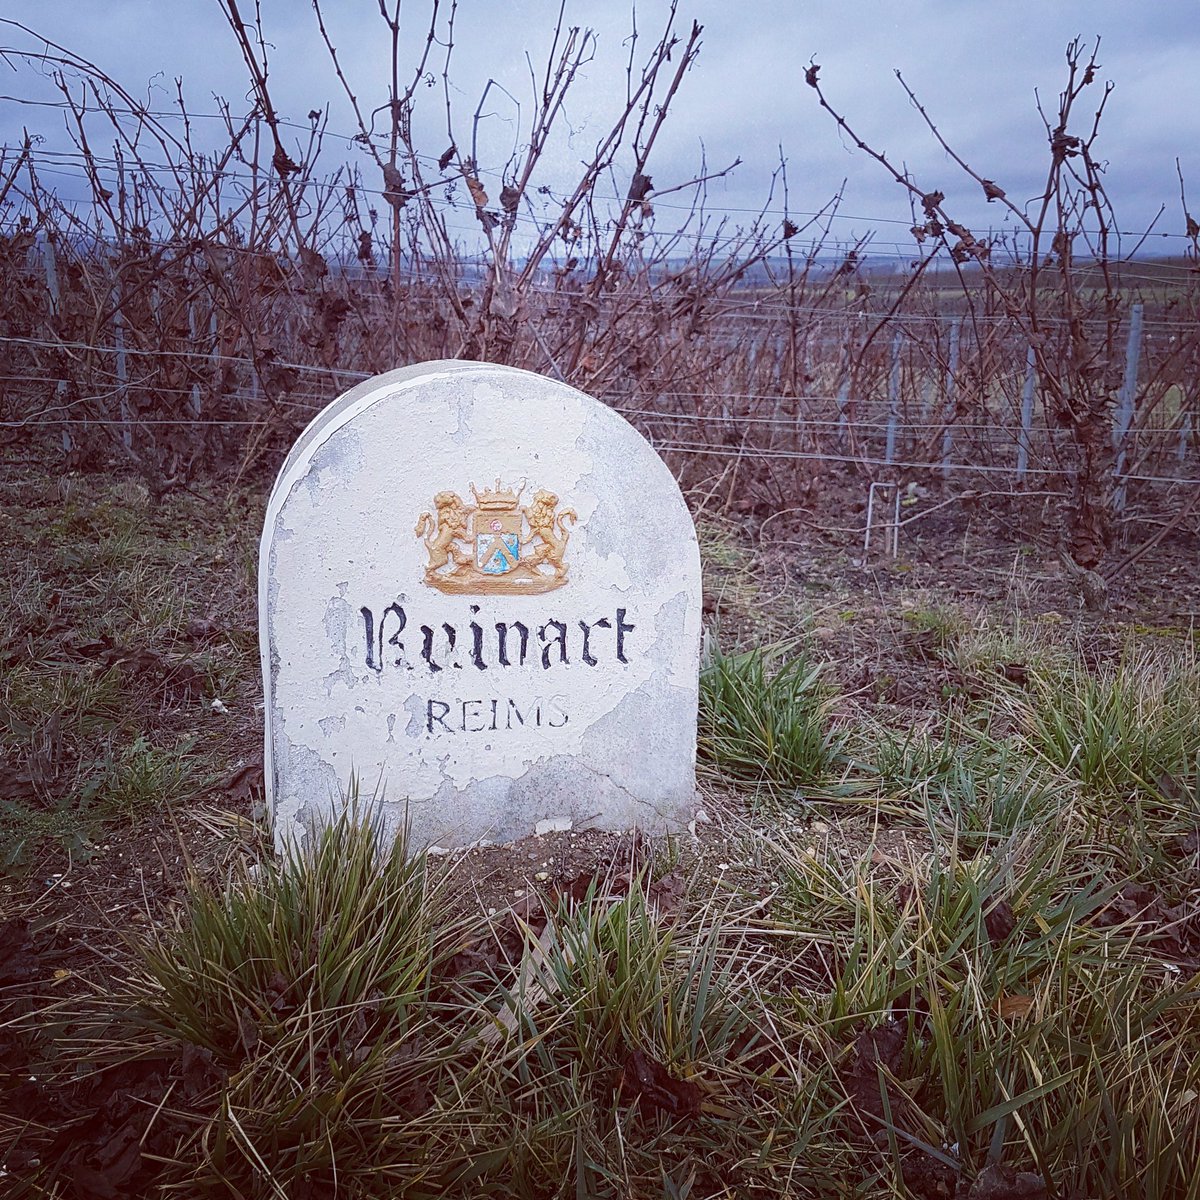 The cold is putting our vines into a deep sleep so they'll be extra rejuvenated come spring #dormantvines #shhht  #winter #champagne